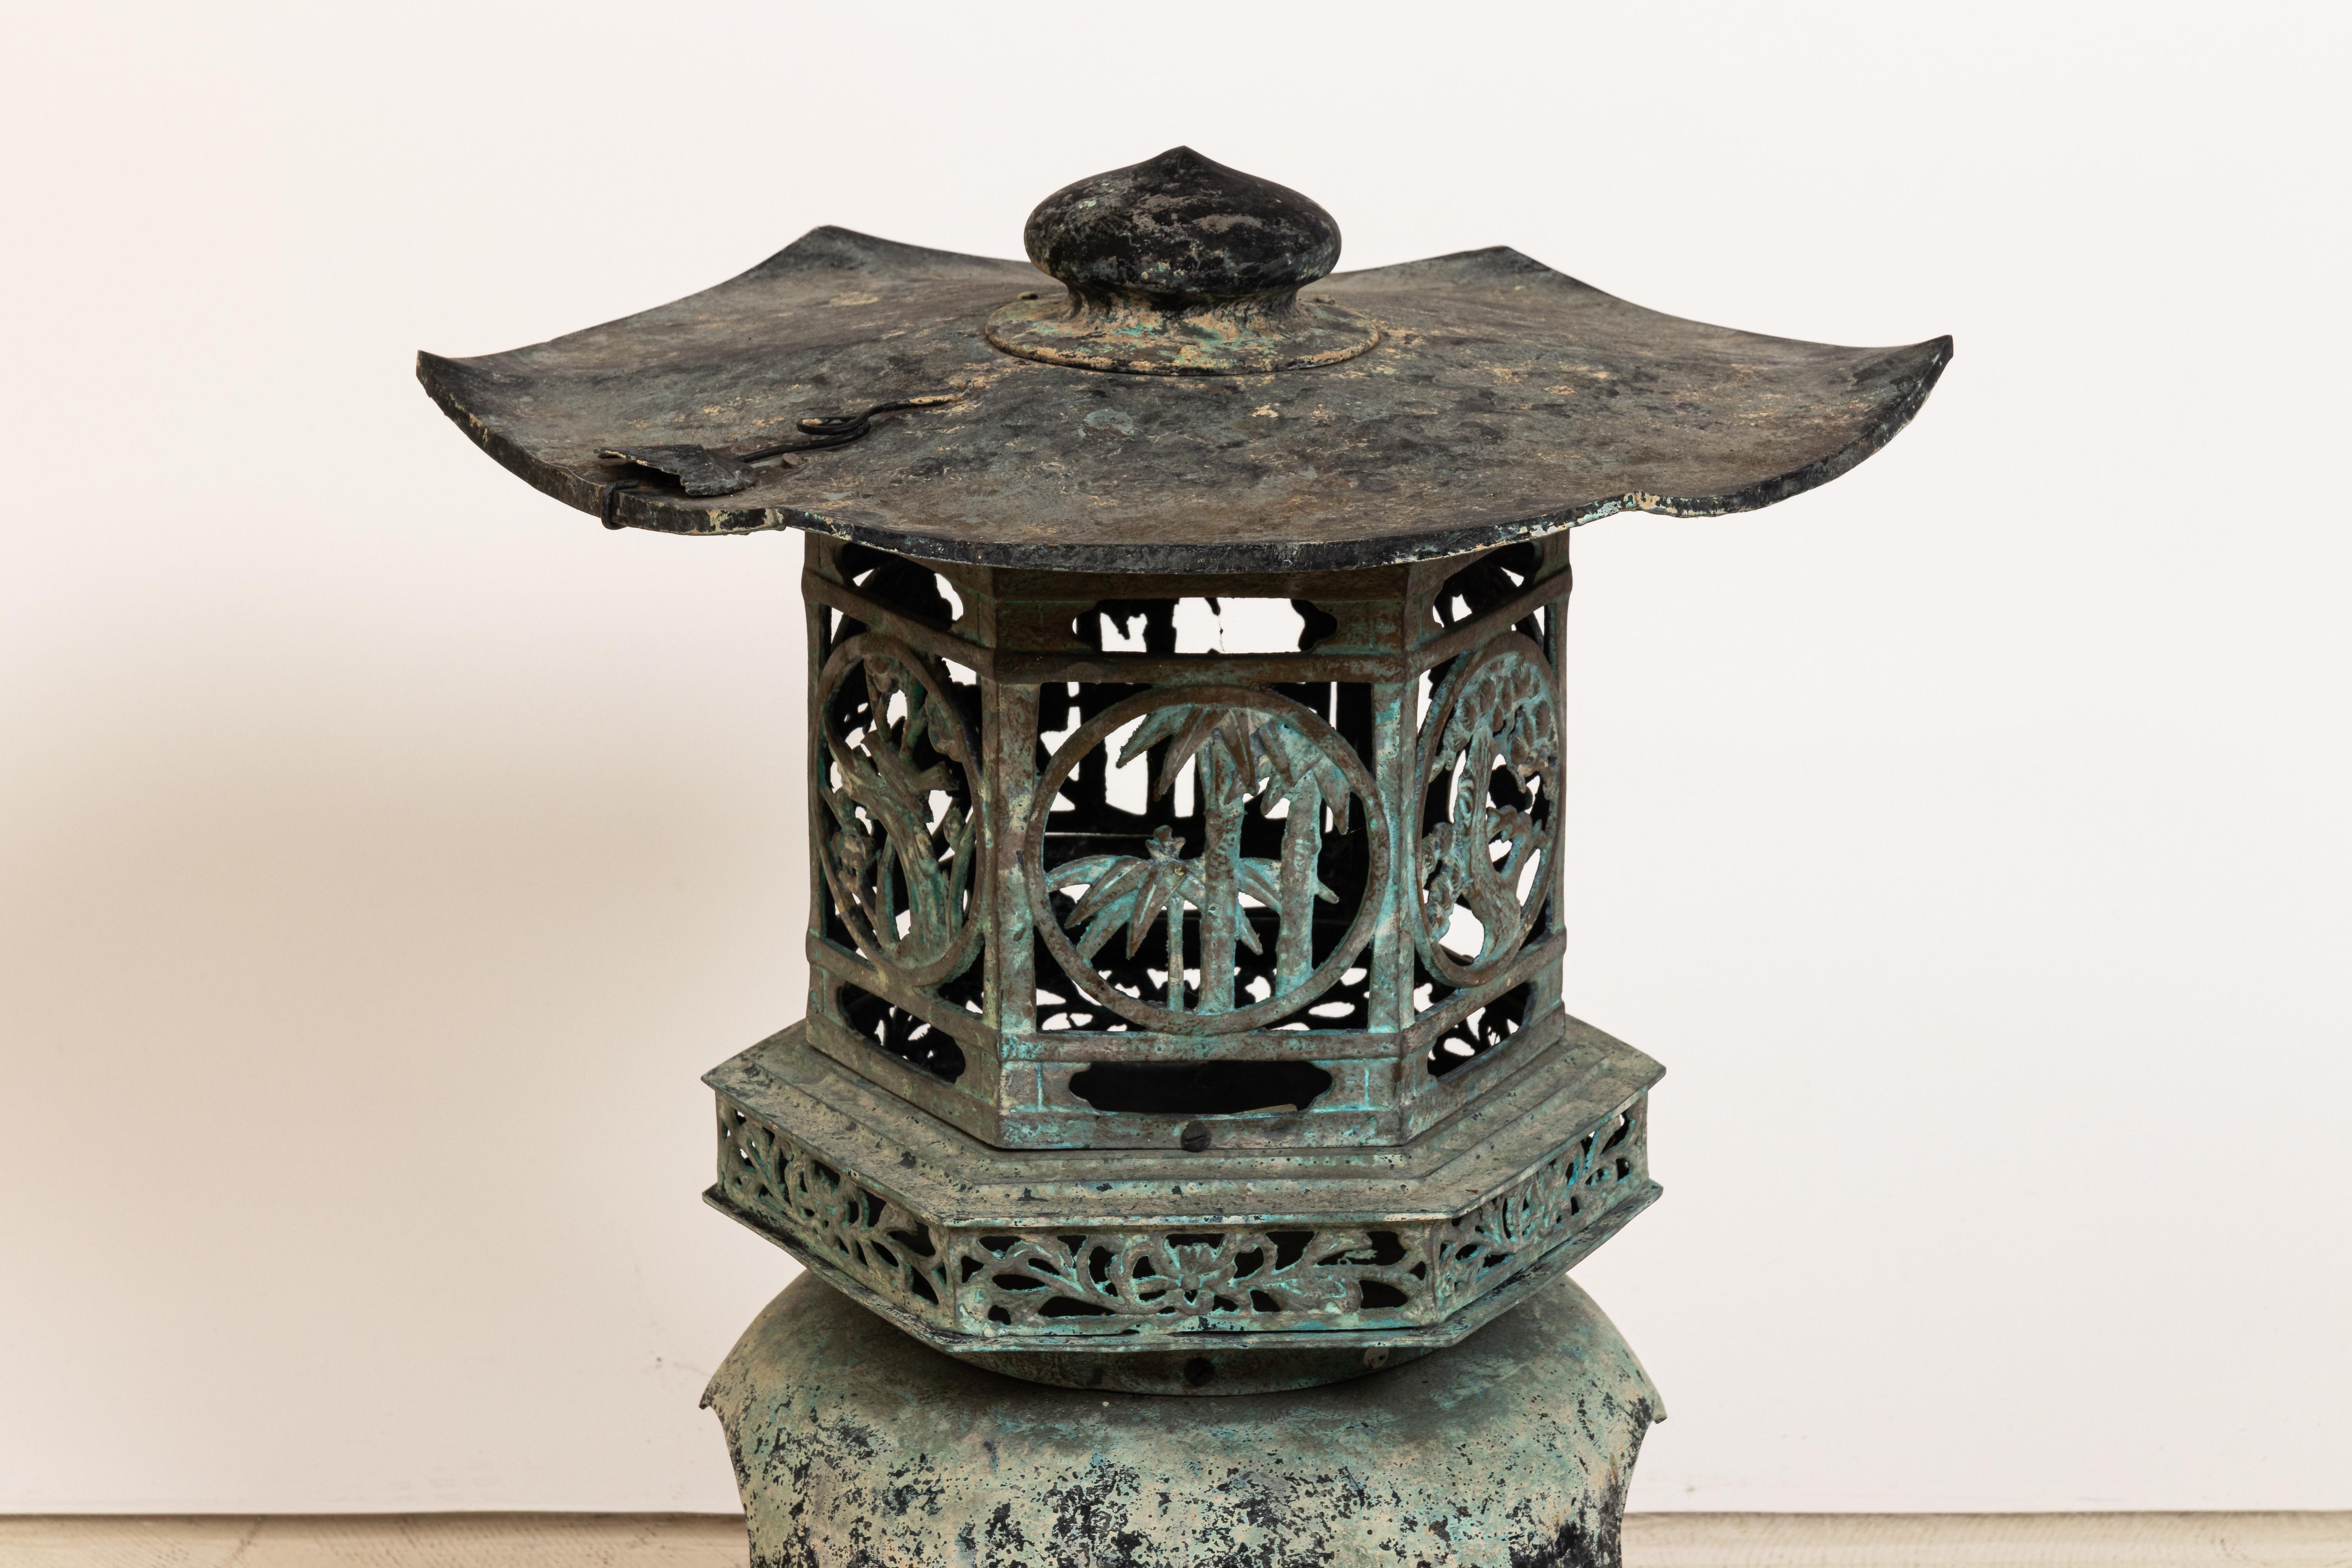 Japanese Cast iron garden pagoda candle holder with great patina finish, circa 1960s. Opens to put candle inside. Please note of wear consistent with age including minor oxidation, patina, and finish loss throughout.